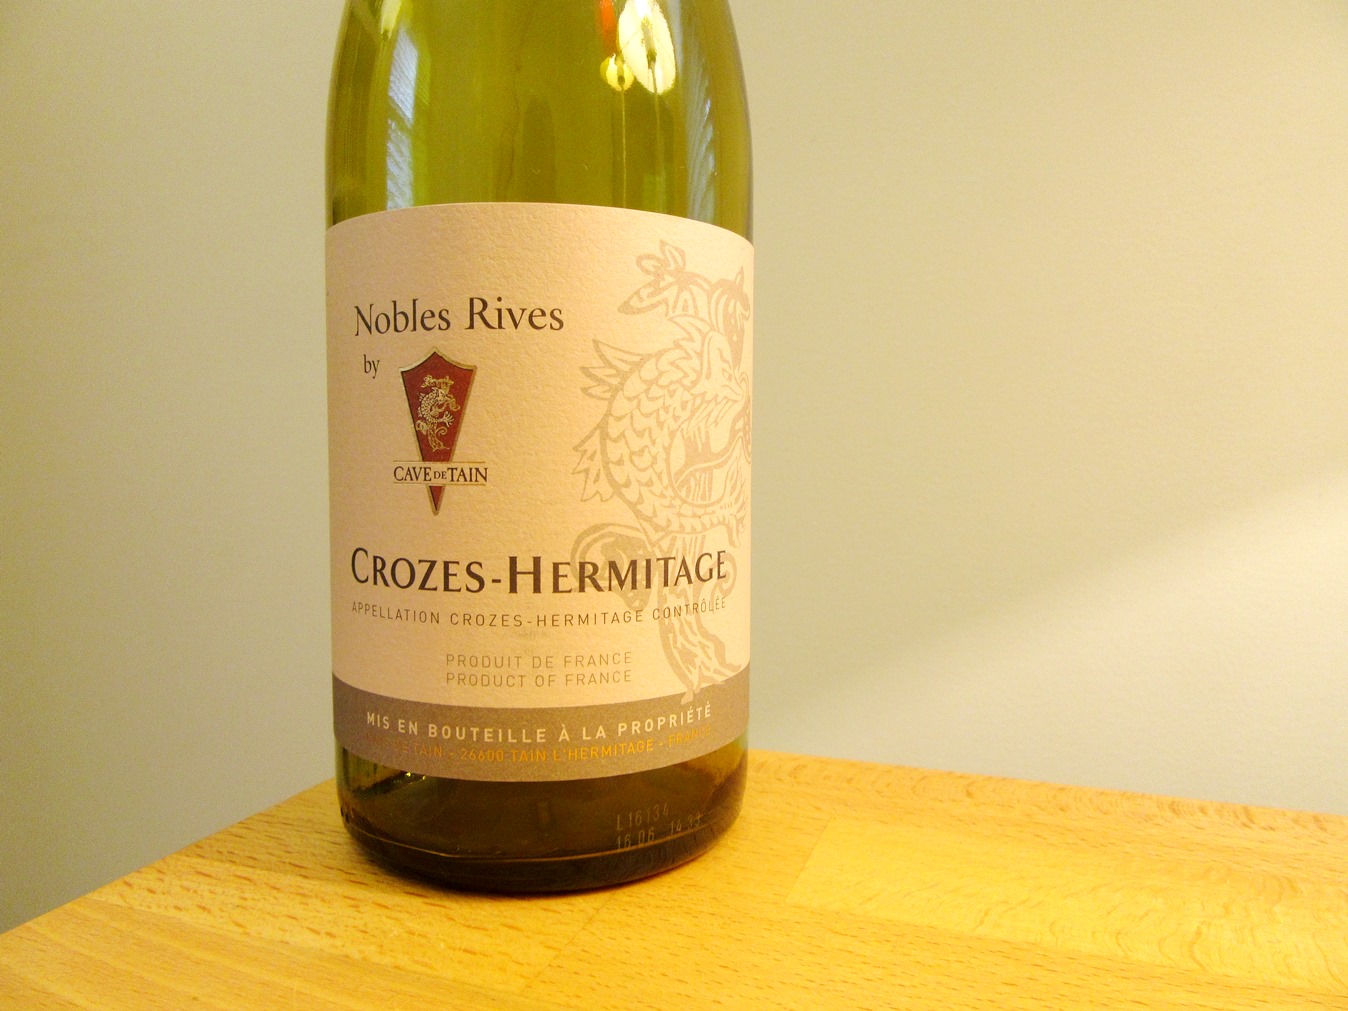 Photo Credit: Wine Casual, Cate de Tain l’Hermitage, Nobles Rives Crozes-Hermitage 2015, Rhone, France